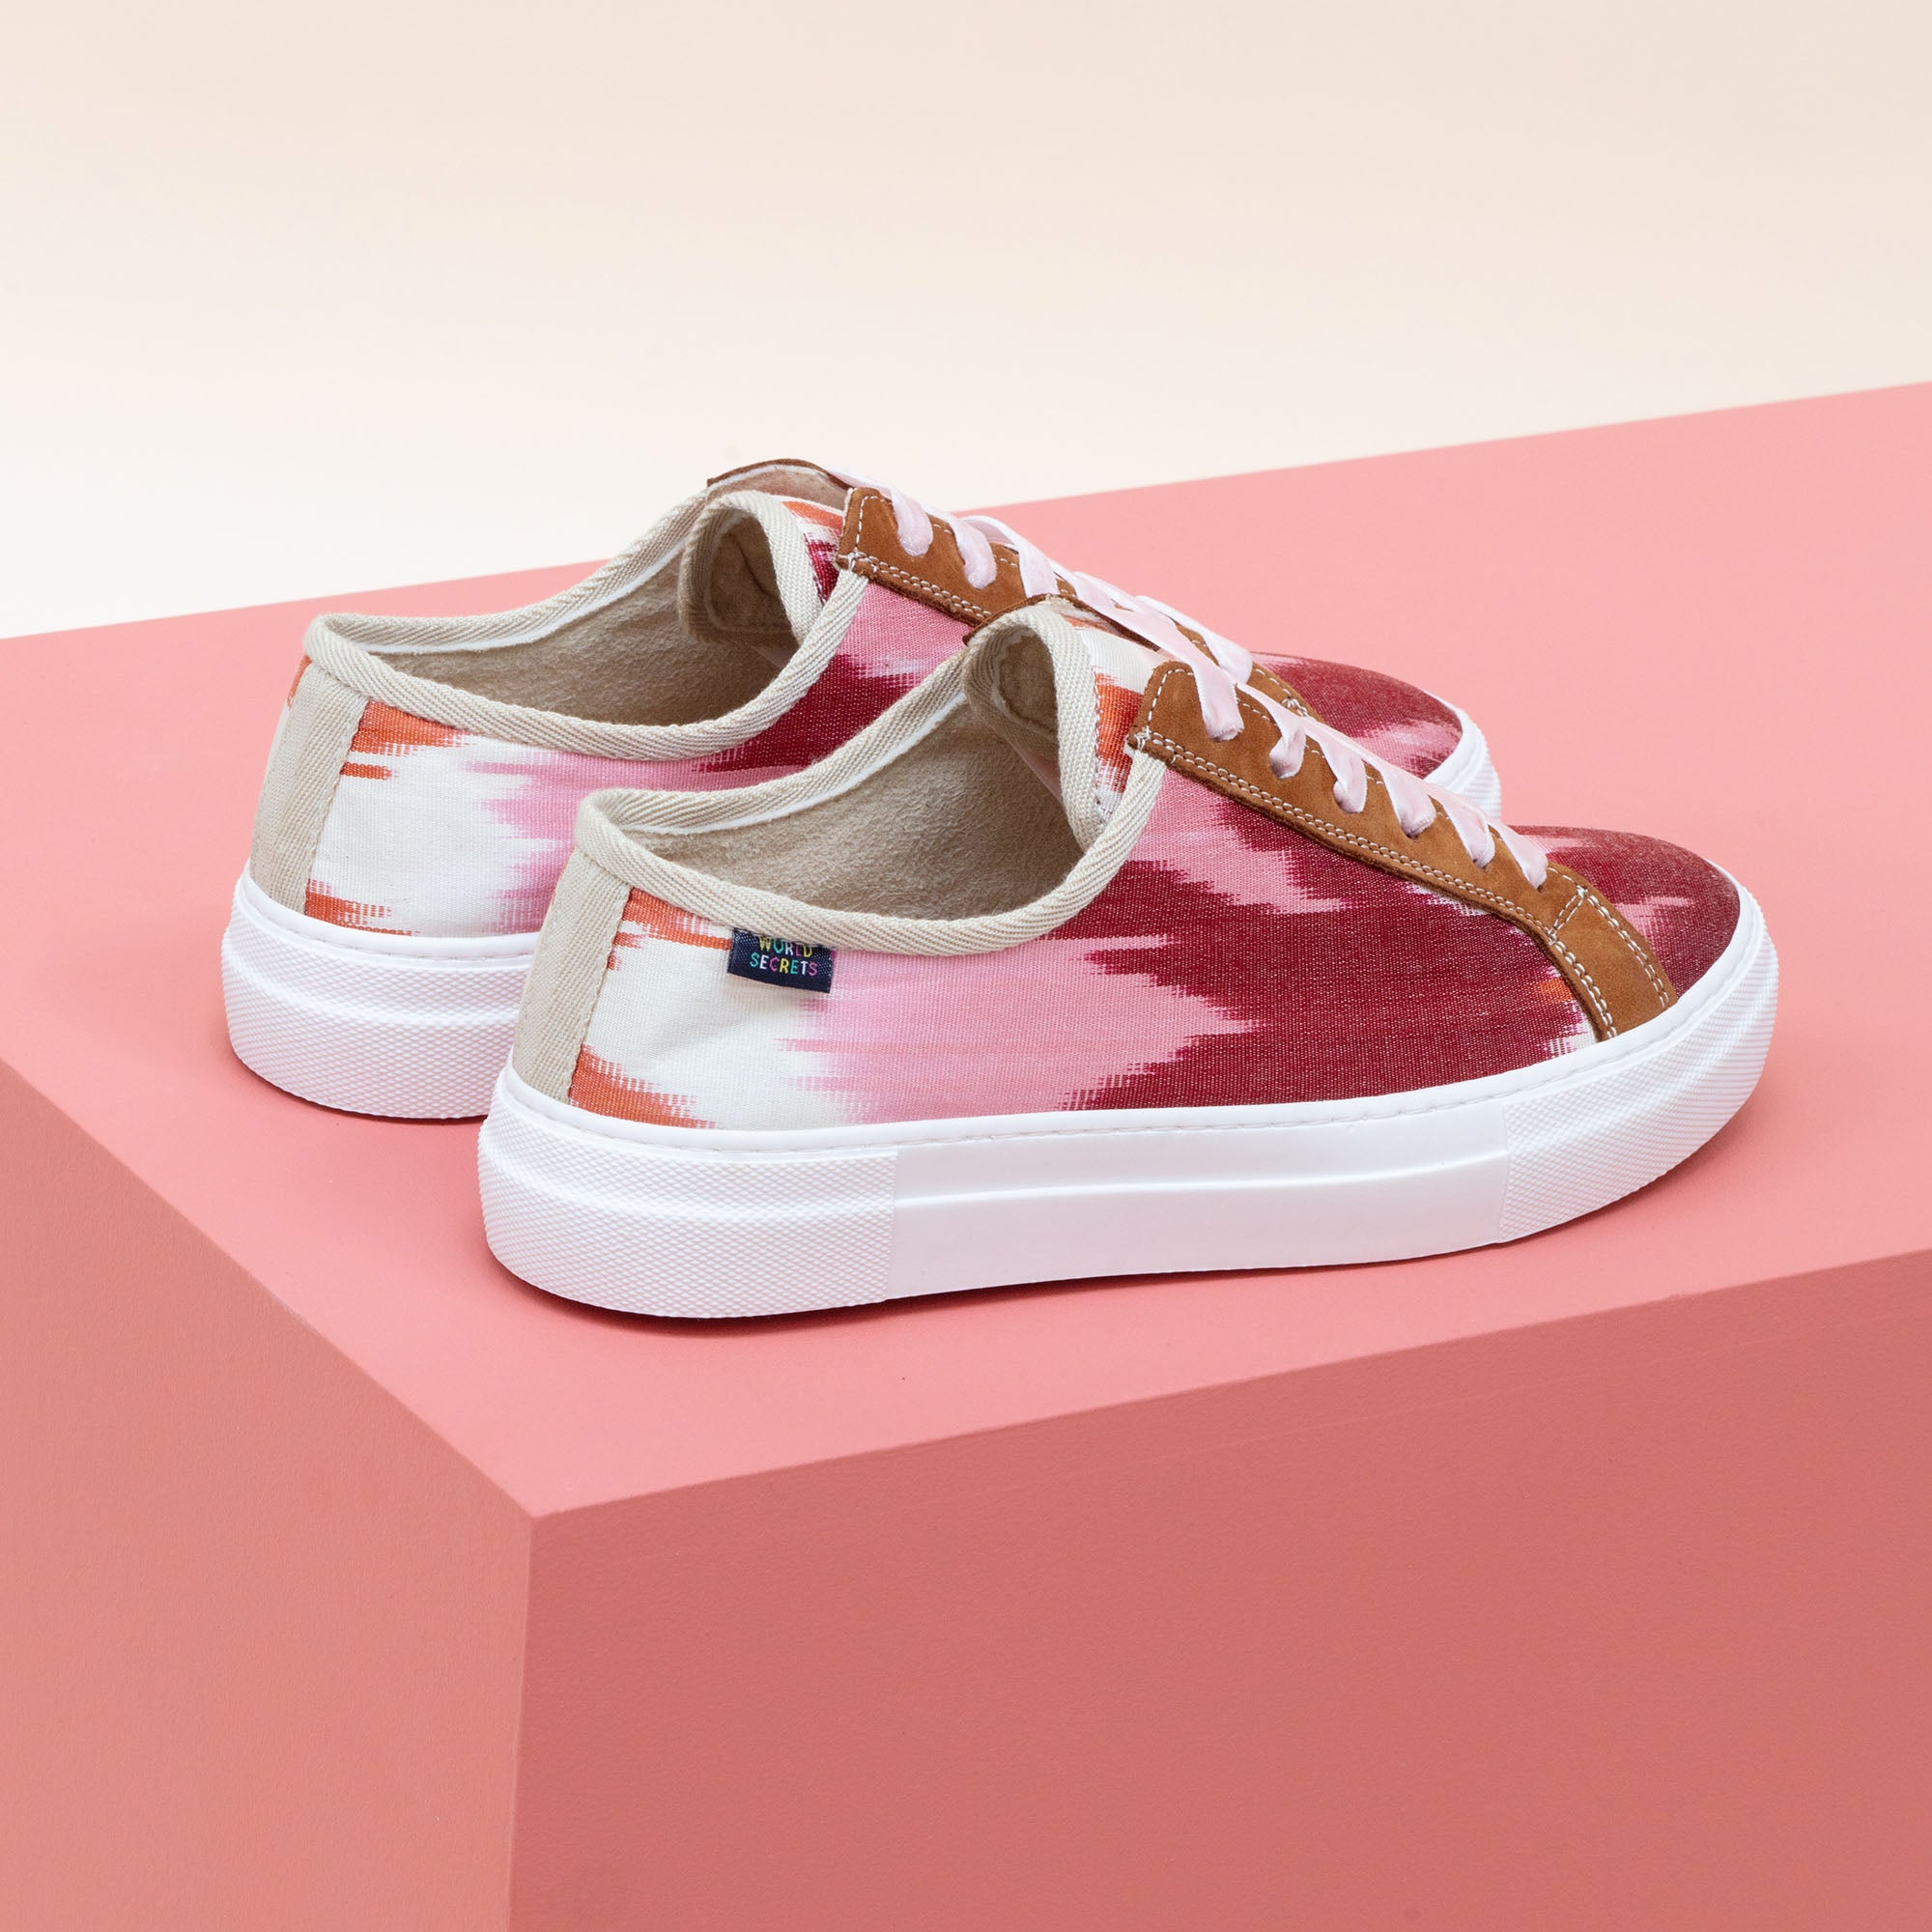 Pink and red Ikat silk sneakers with tan leather